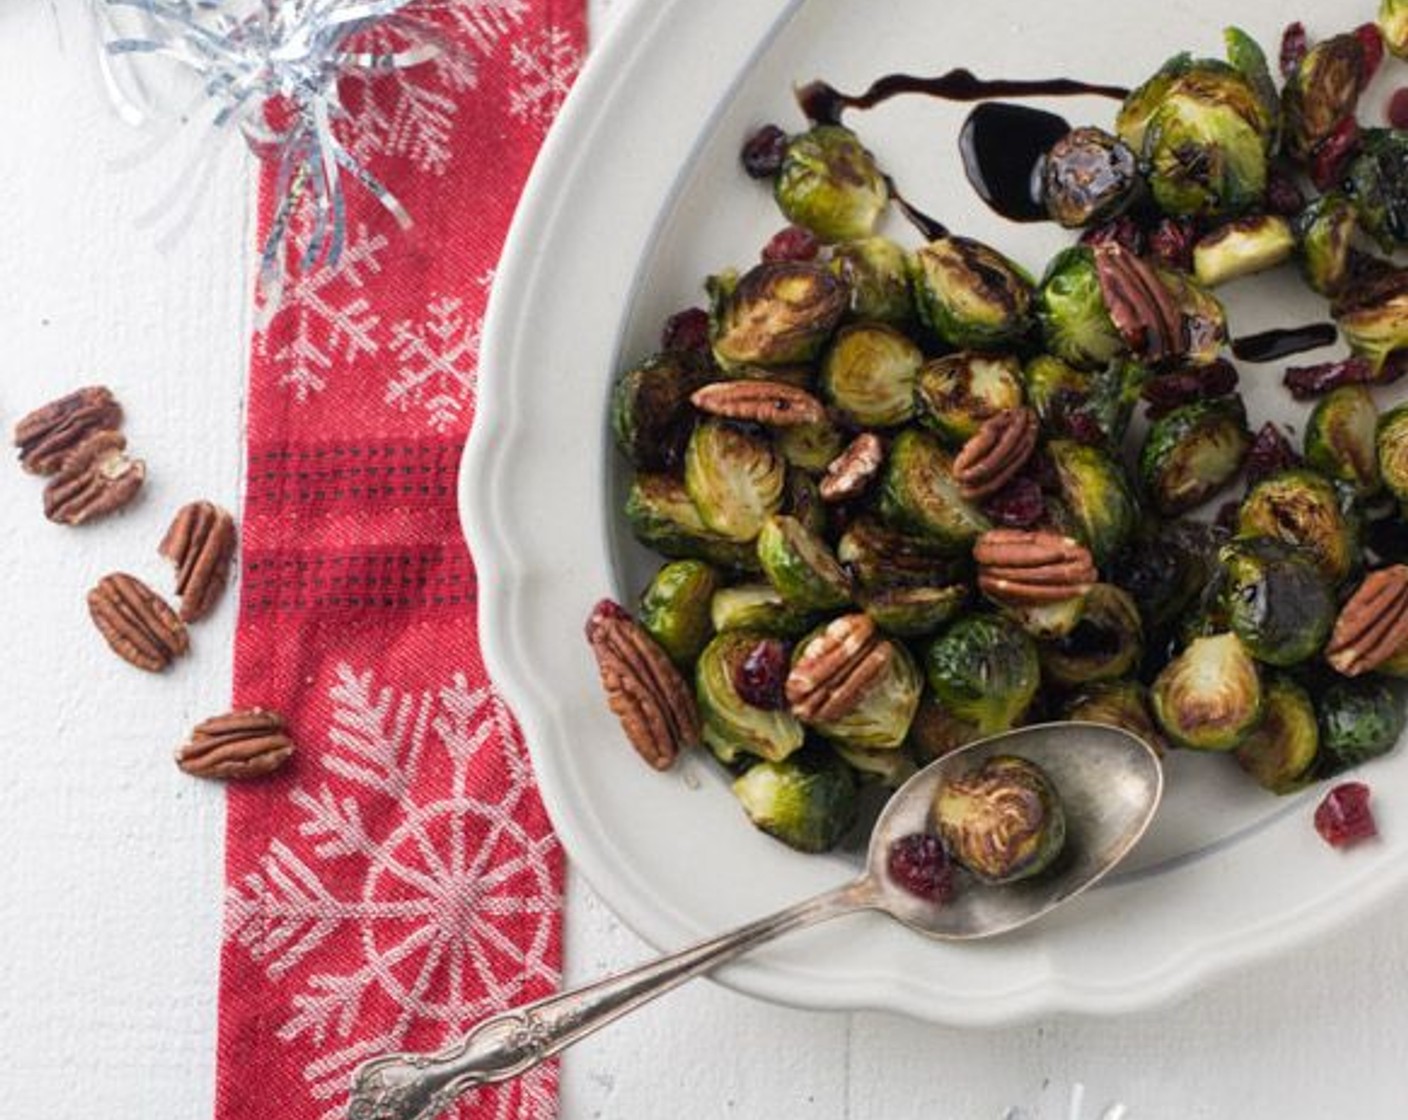 step 6 Combine the brussels sprouts, pecans, and Dried Cranberries (1/4 cup) on a serving platter. Drizzle with the Balsamic Glaze (1 Tbsp).